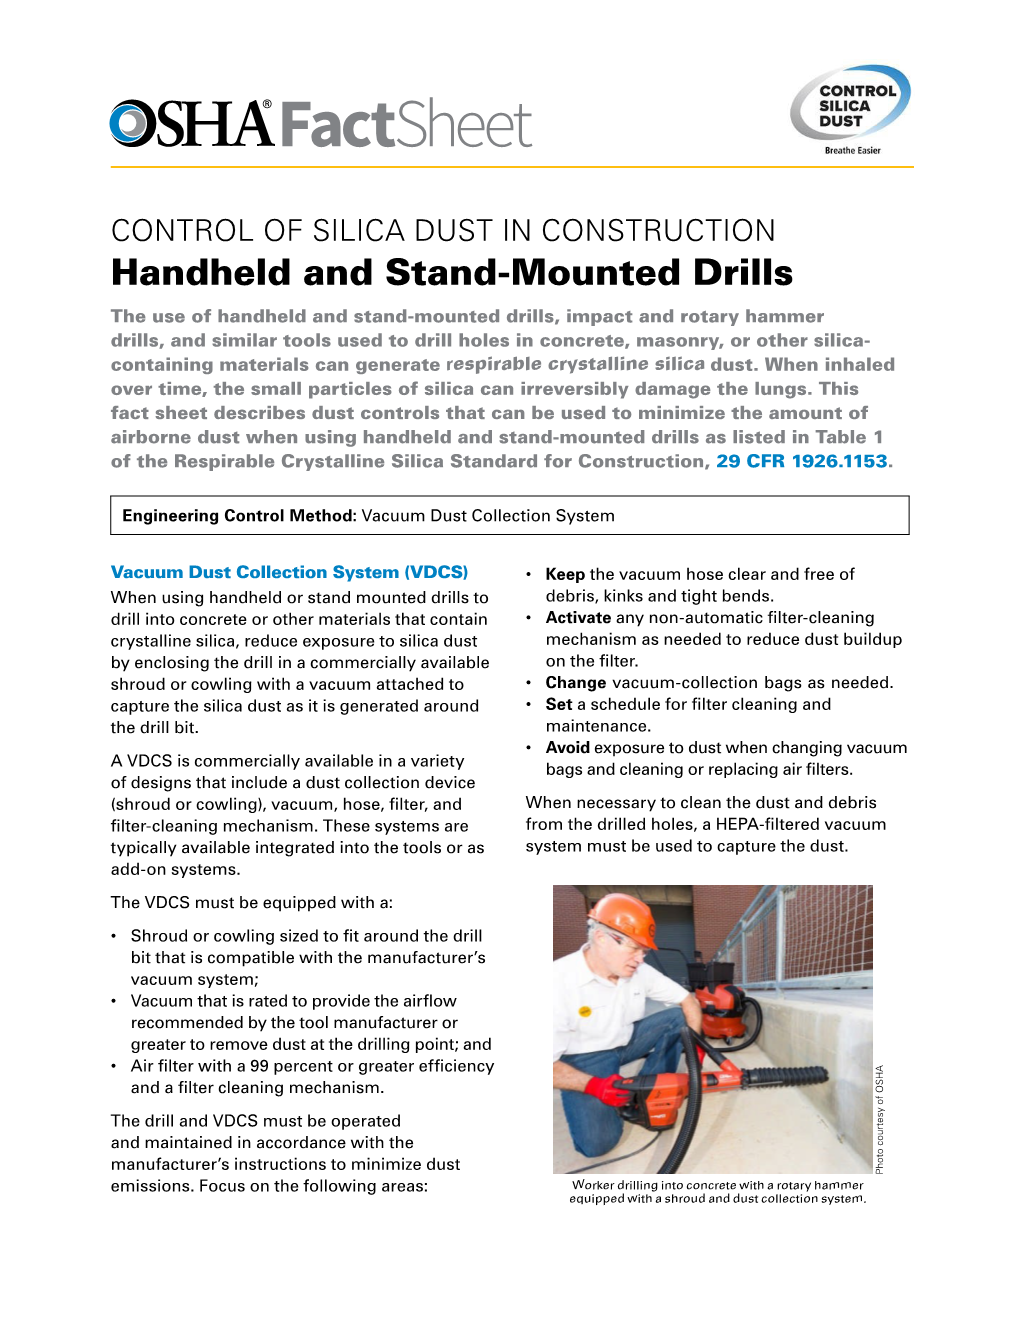 Handheld and Stand-Mounted Drills Fact Sheet